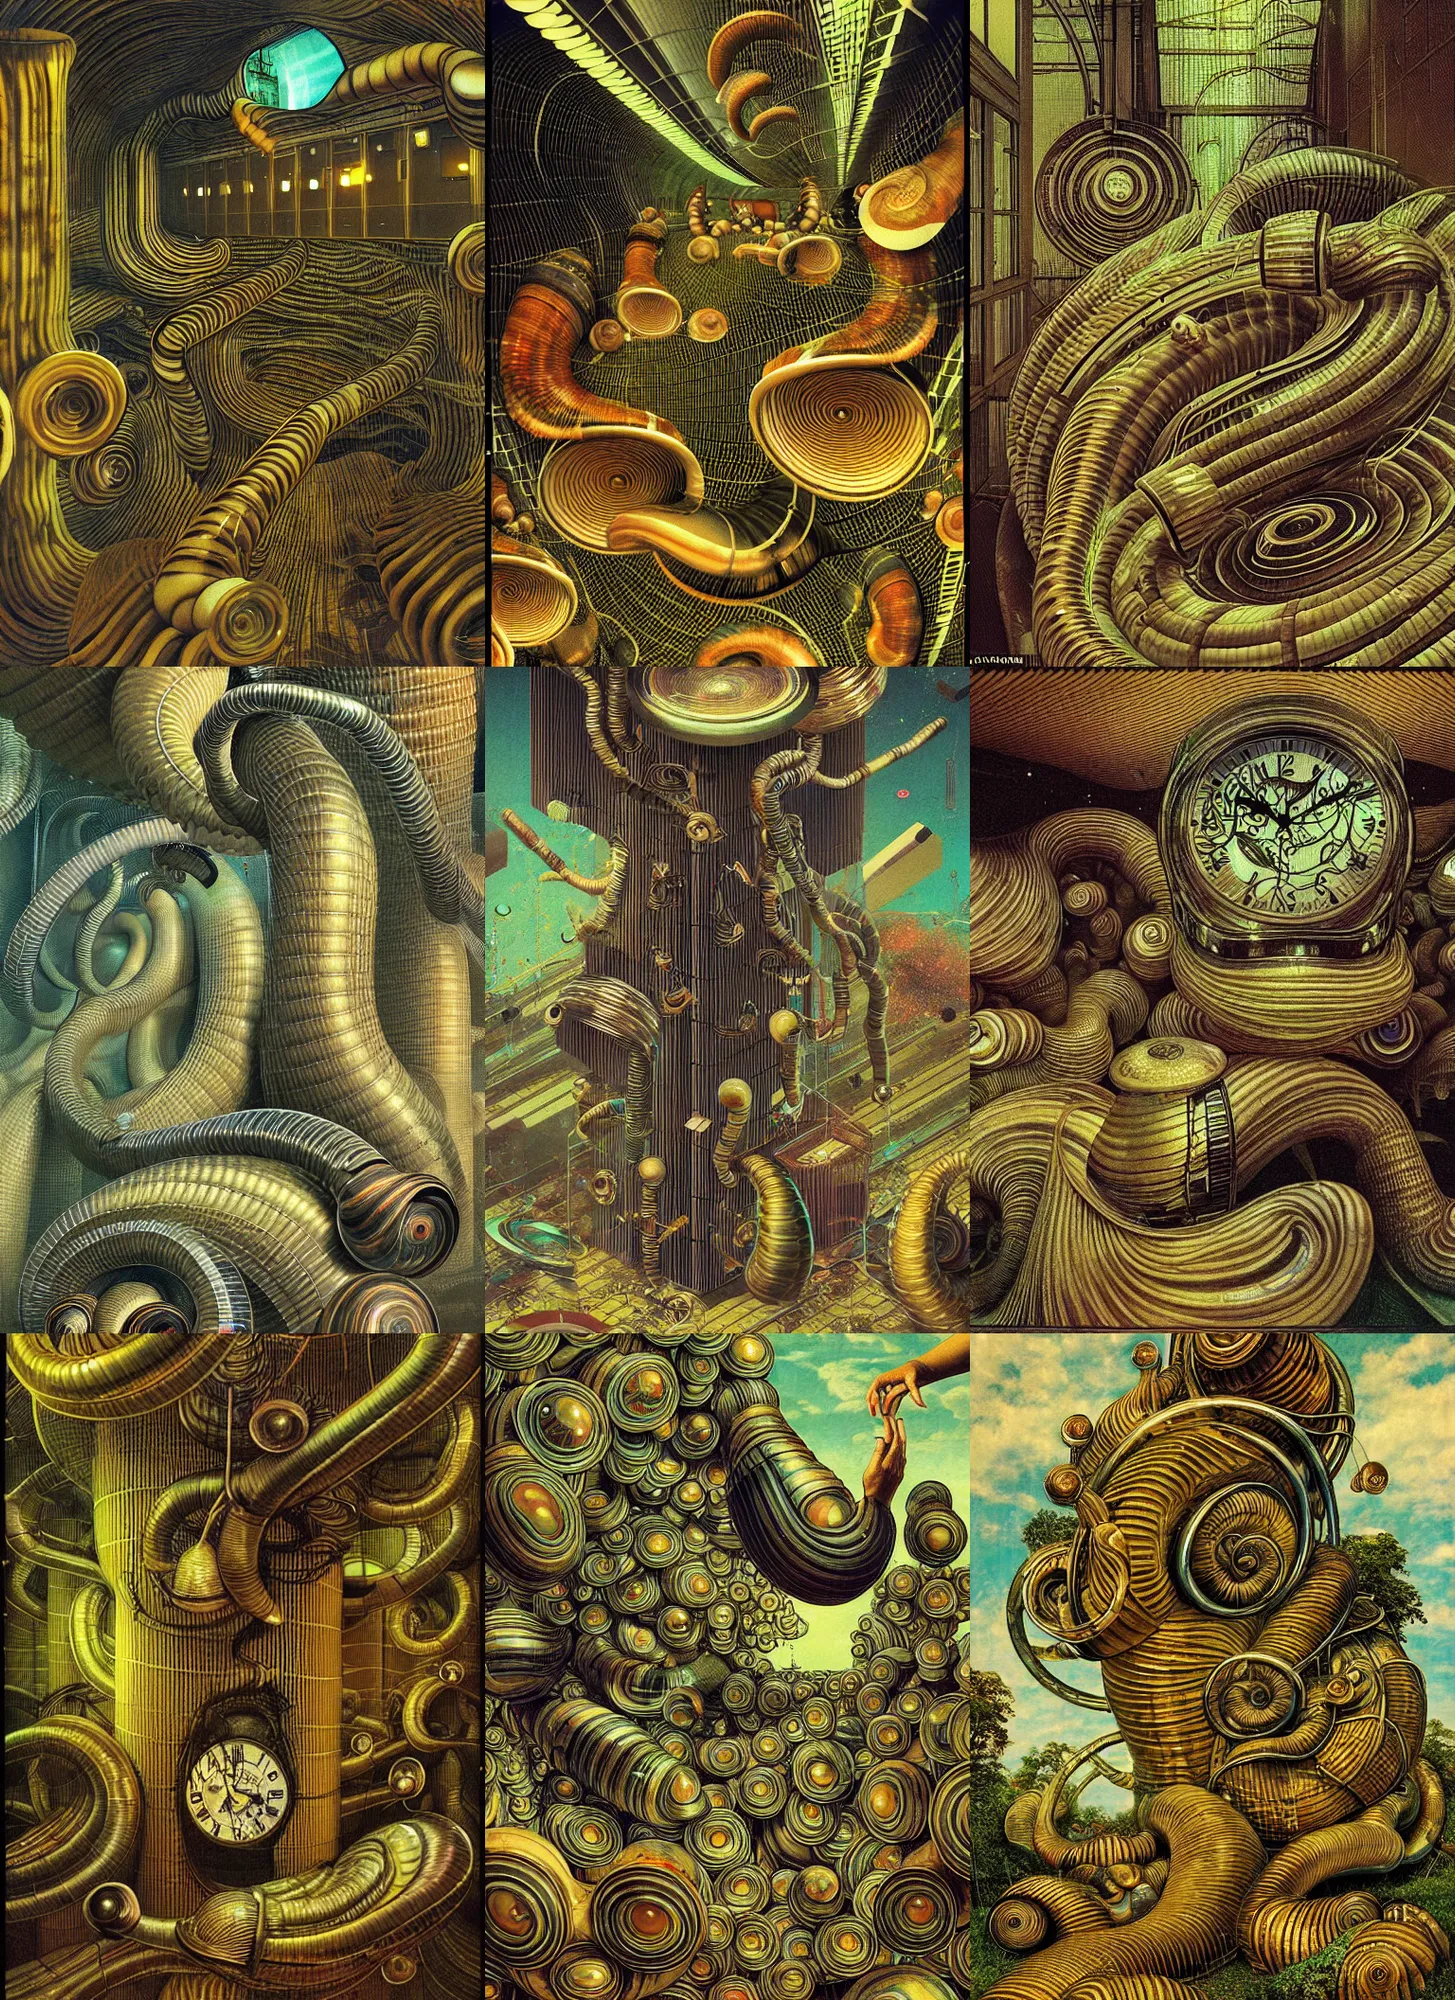 Prompt: she has scanlines supersede slick chrome grandfather clocks flowing ((hans thoma)) caustically (((beeple))) between giant snails of phantasmagorical corrugated pipe people that drift and dance to dropped beats and mashed pot pits